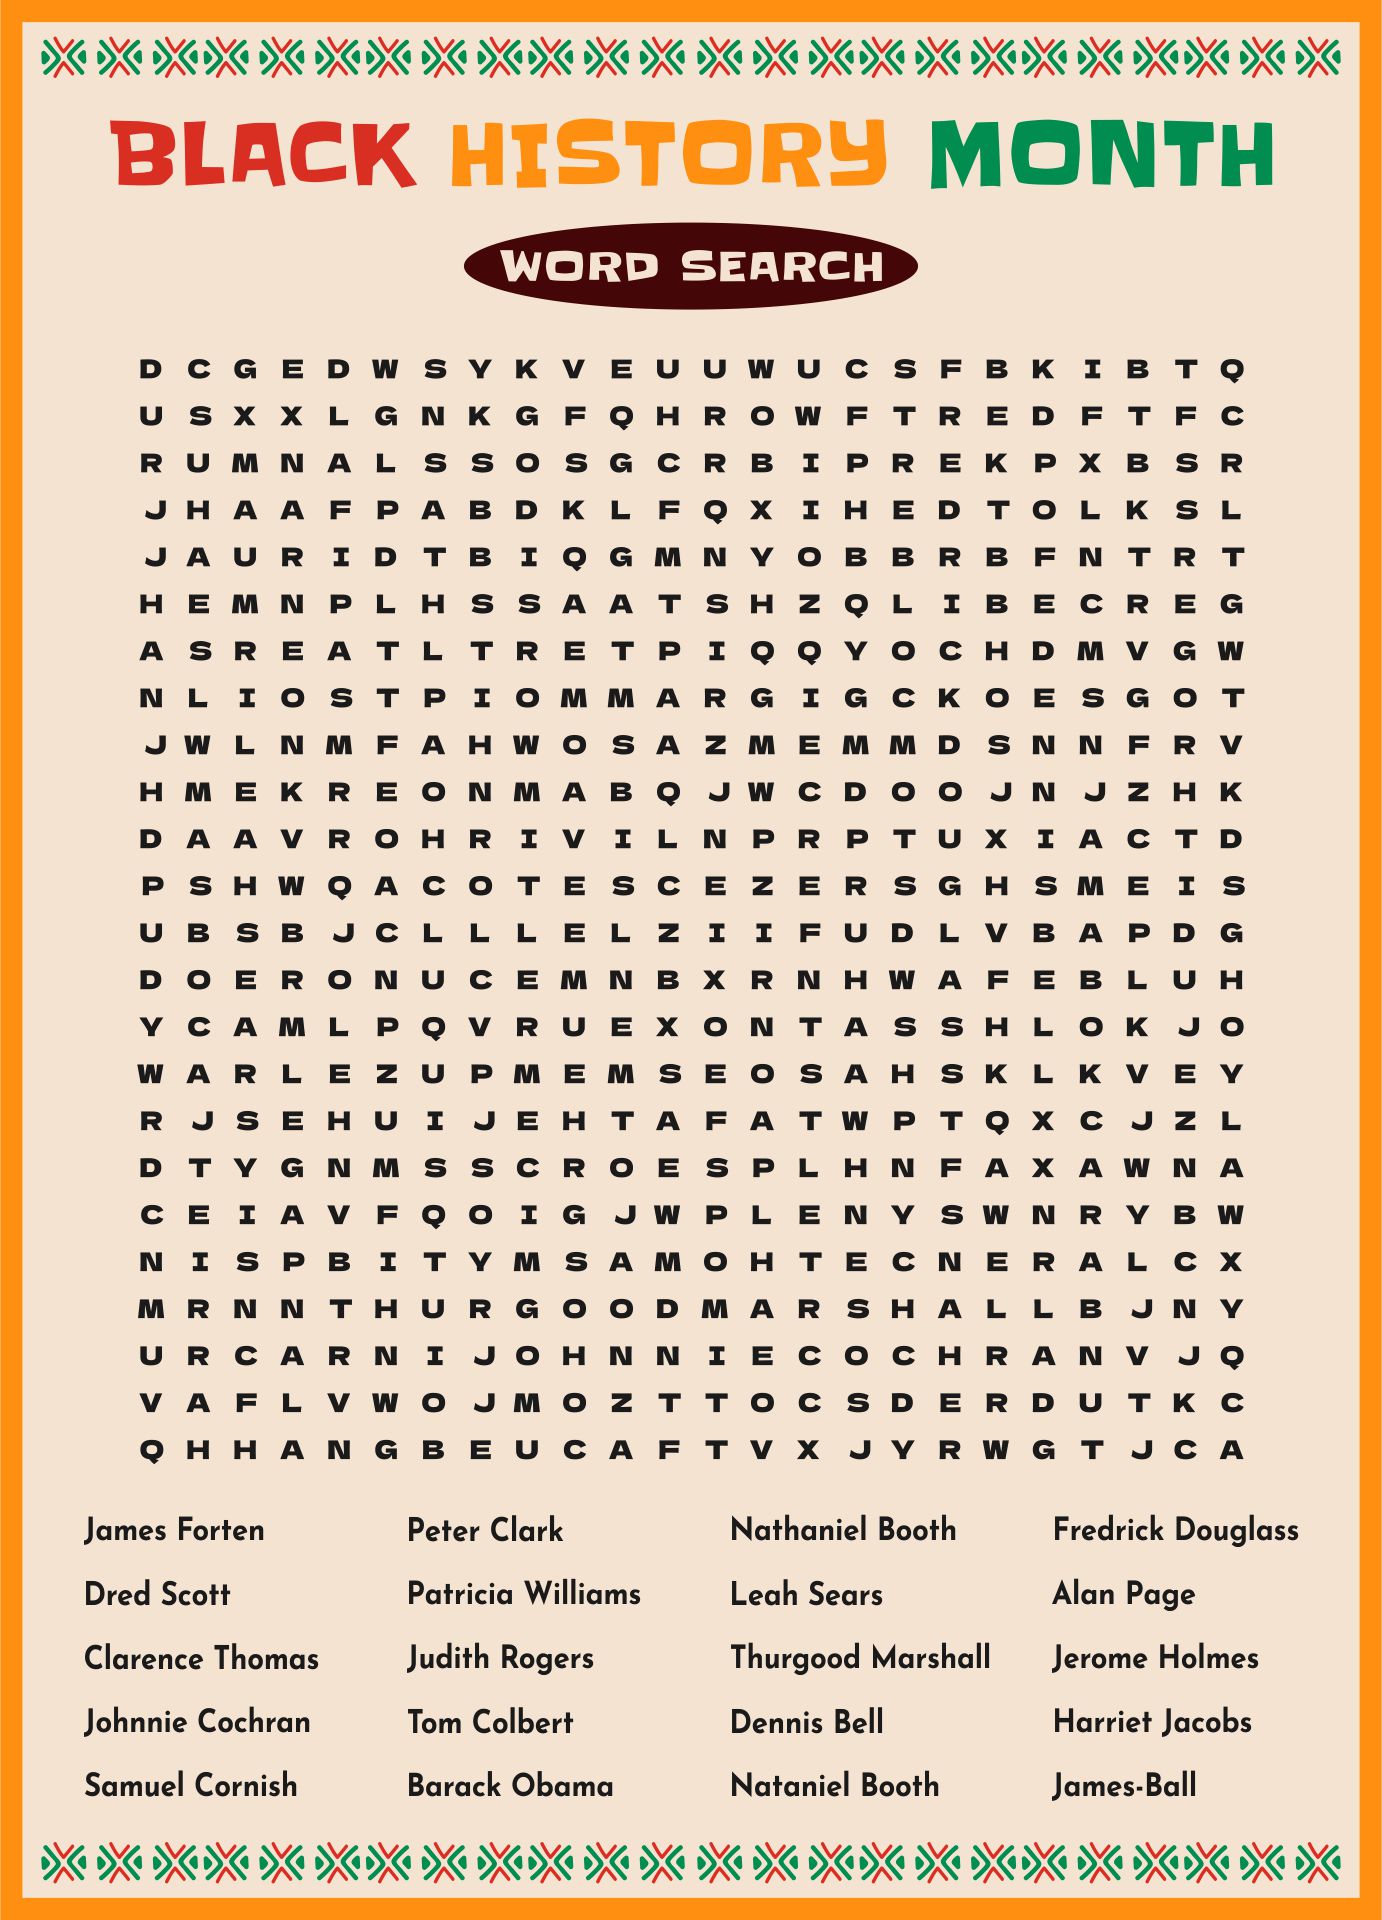 Black History Month Word Search